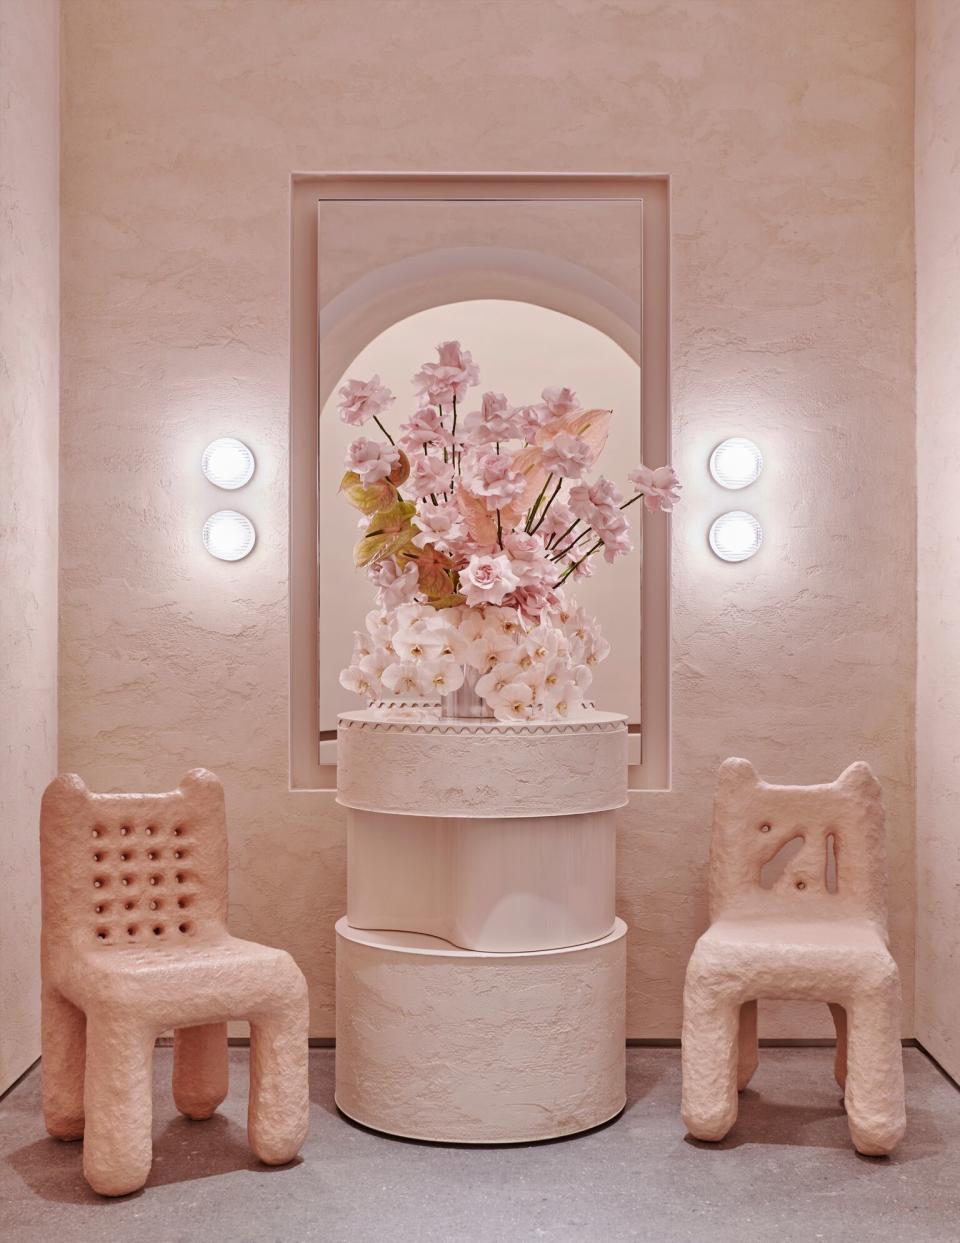 Glossier flagship store in NYC